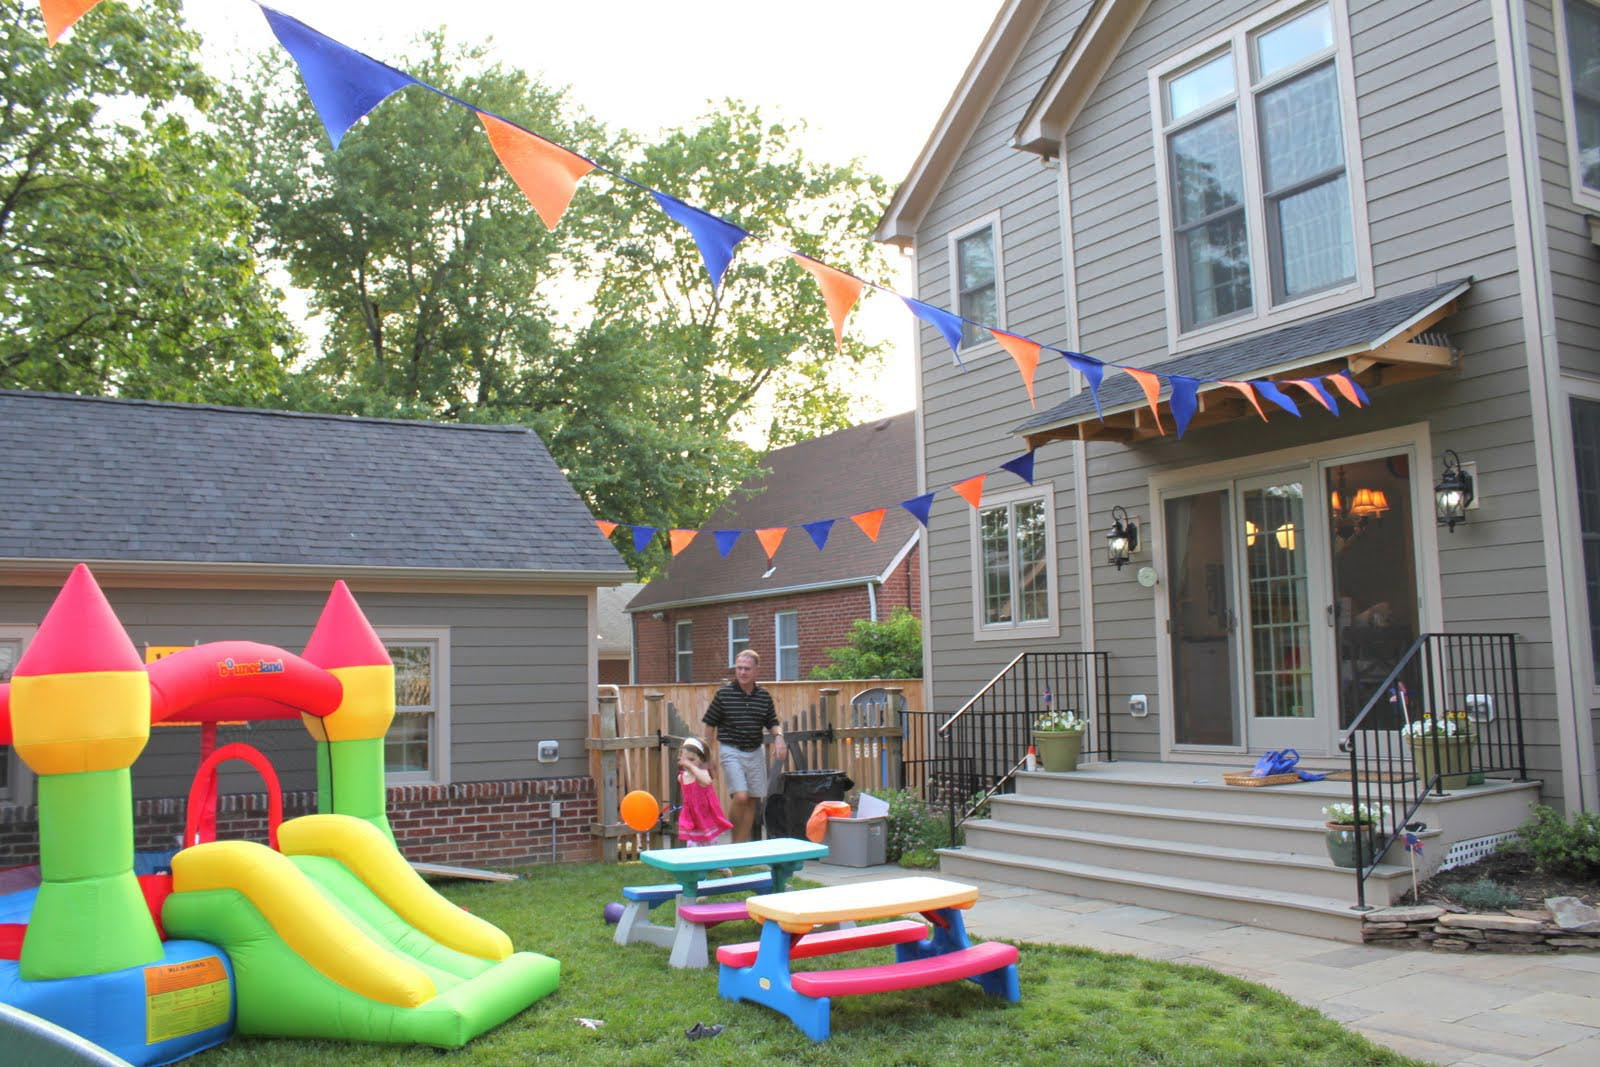 Toddler Backyard Birthday Party Ideas
 What Idea to Choose for a Toddler Birthday Party